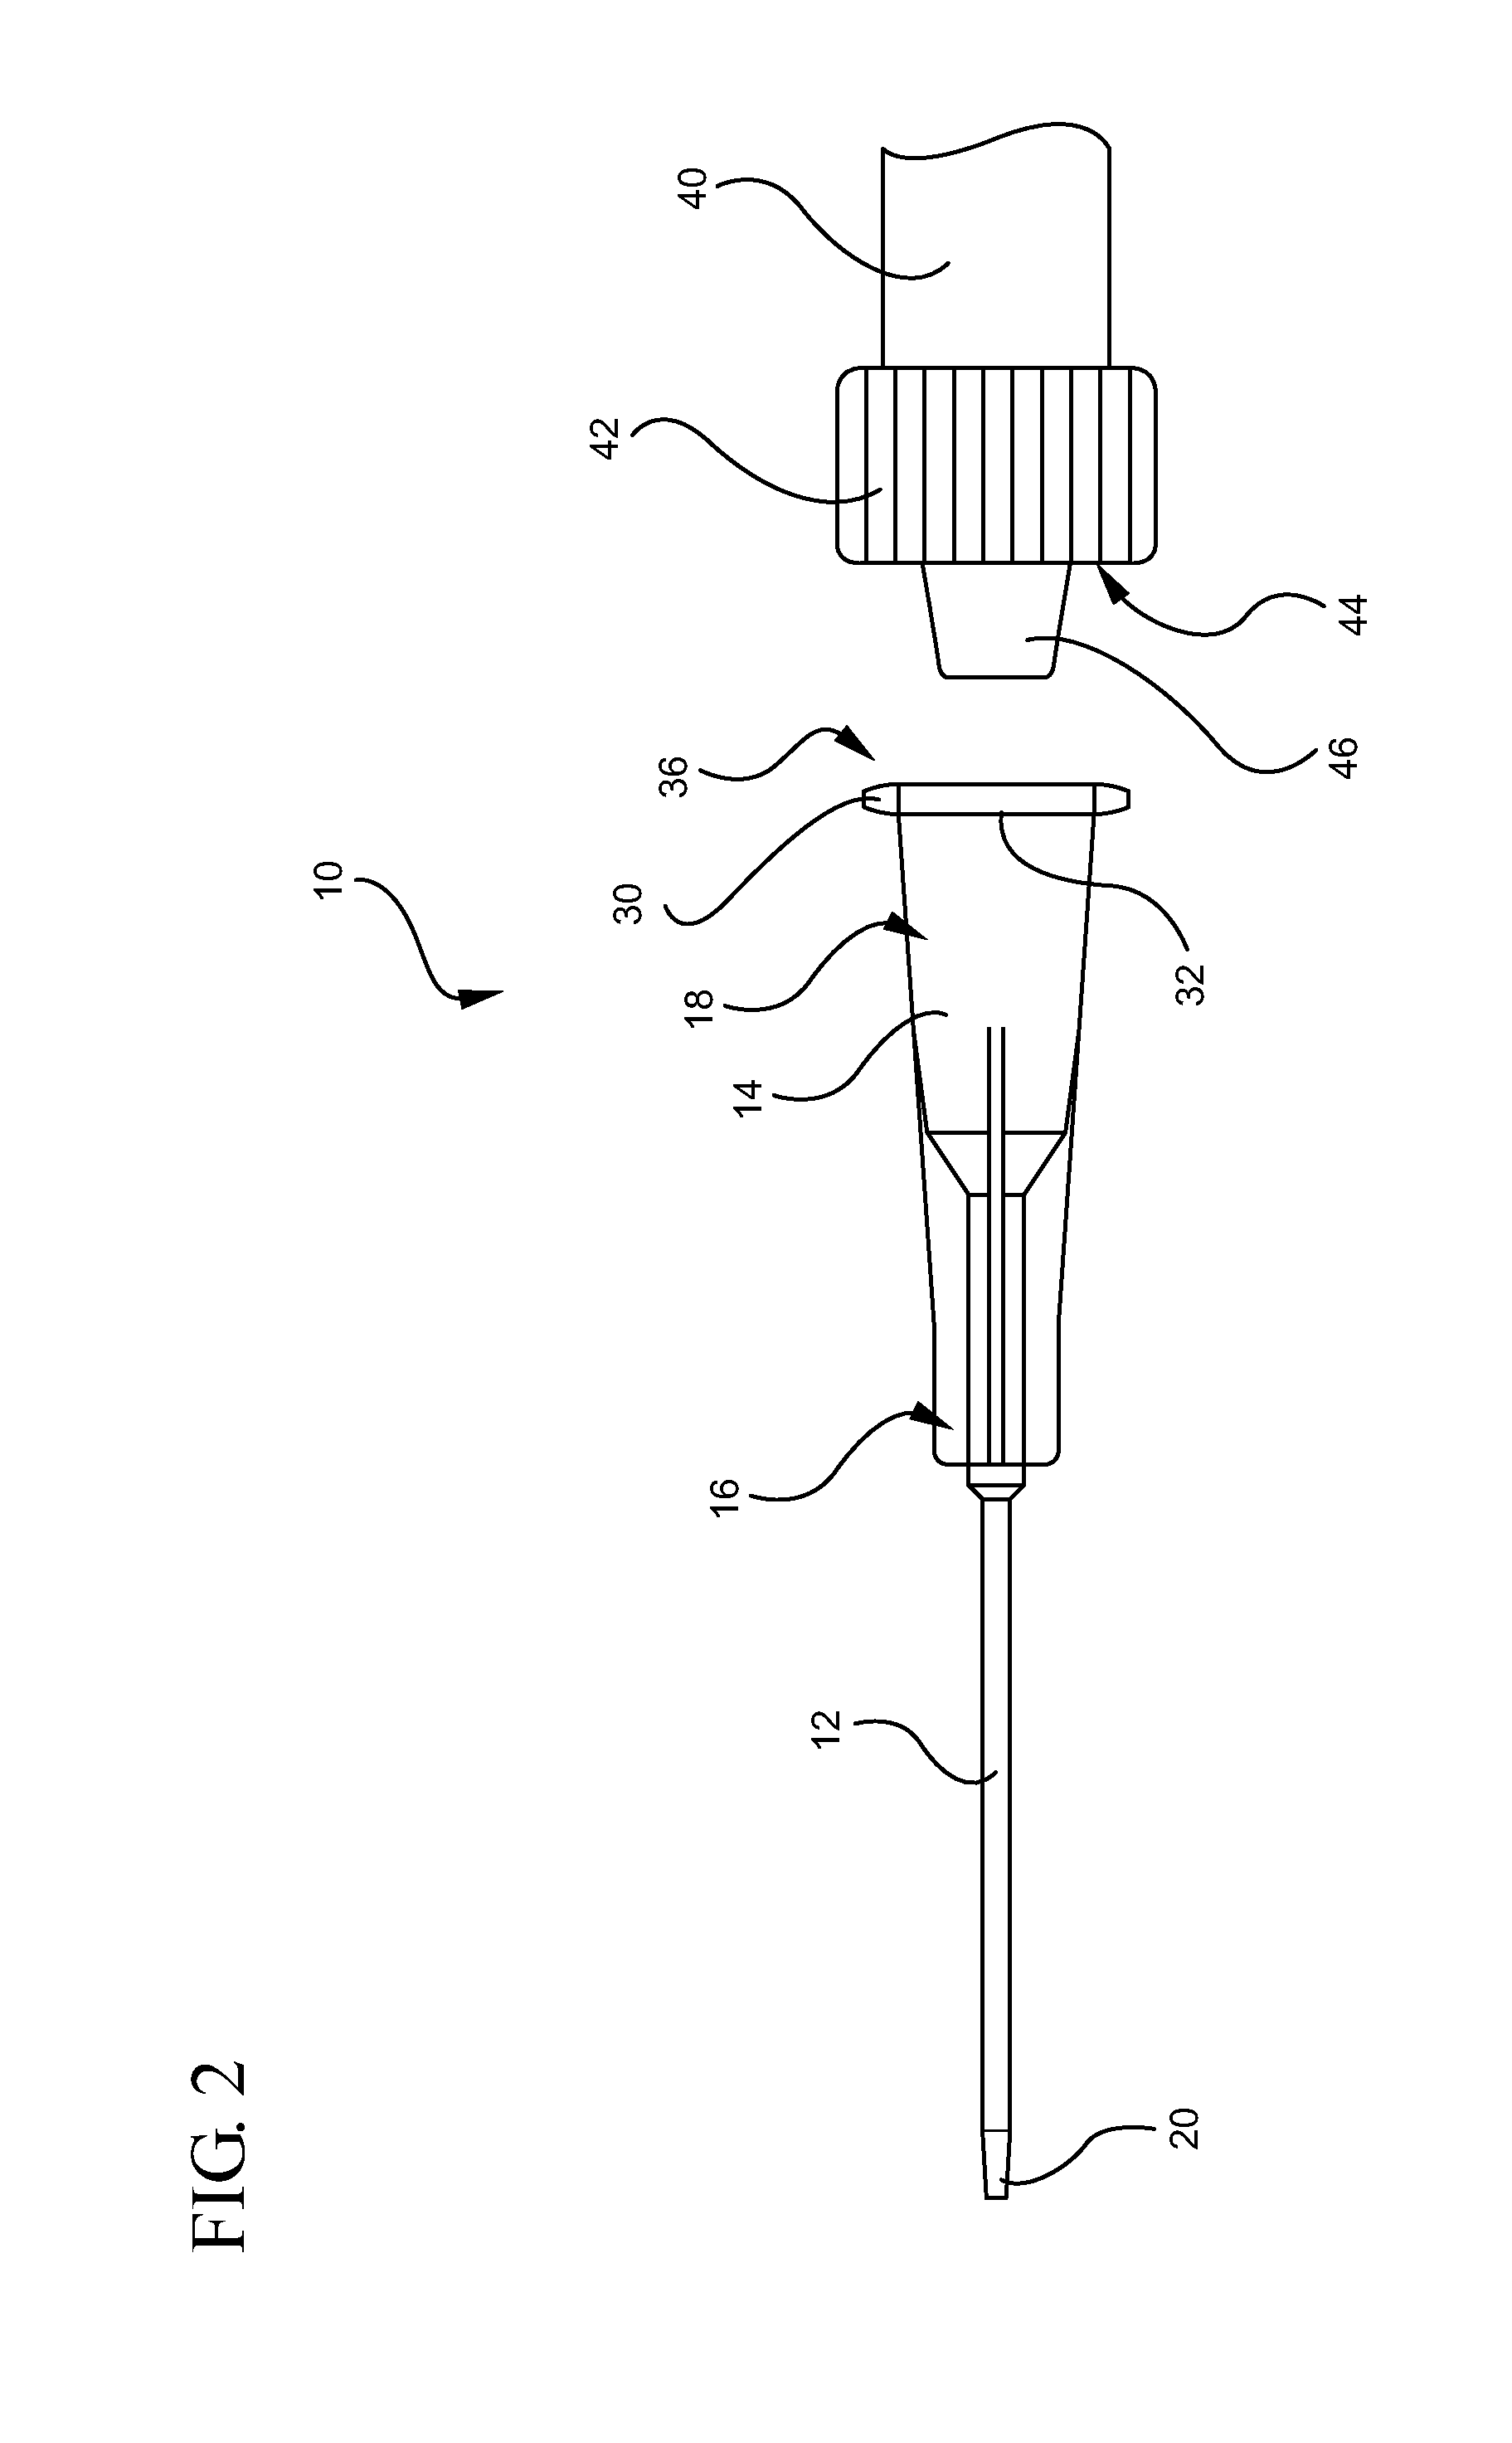 Systems and methods to compensate for compression forces in an intravascular device